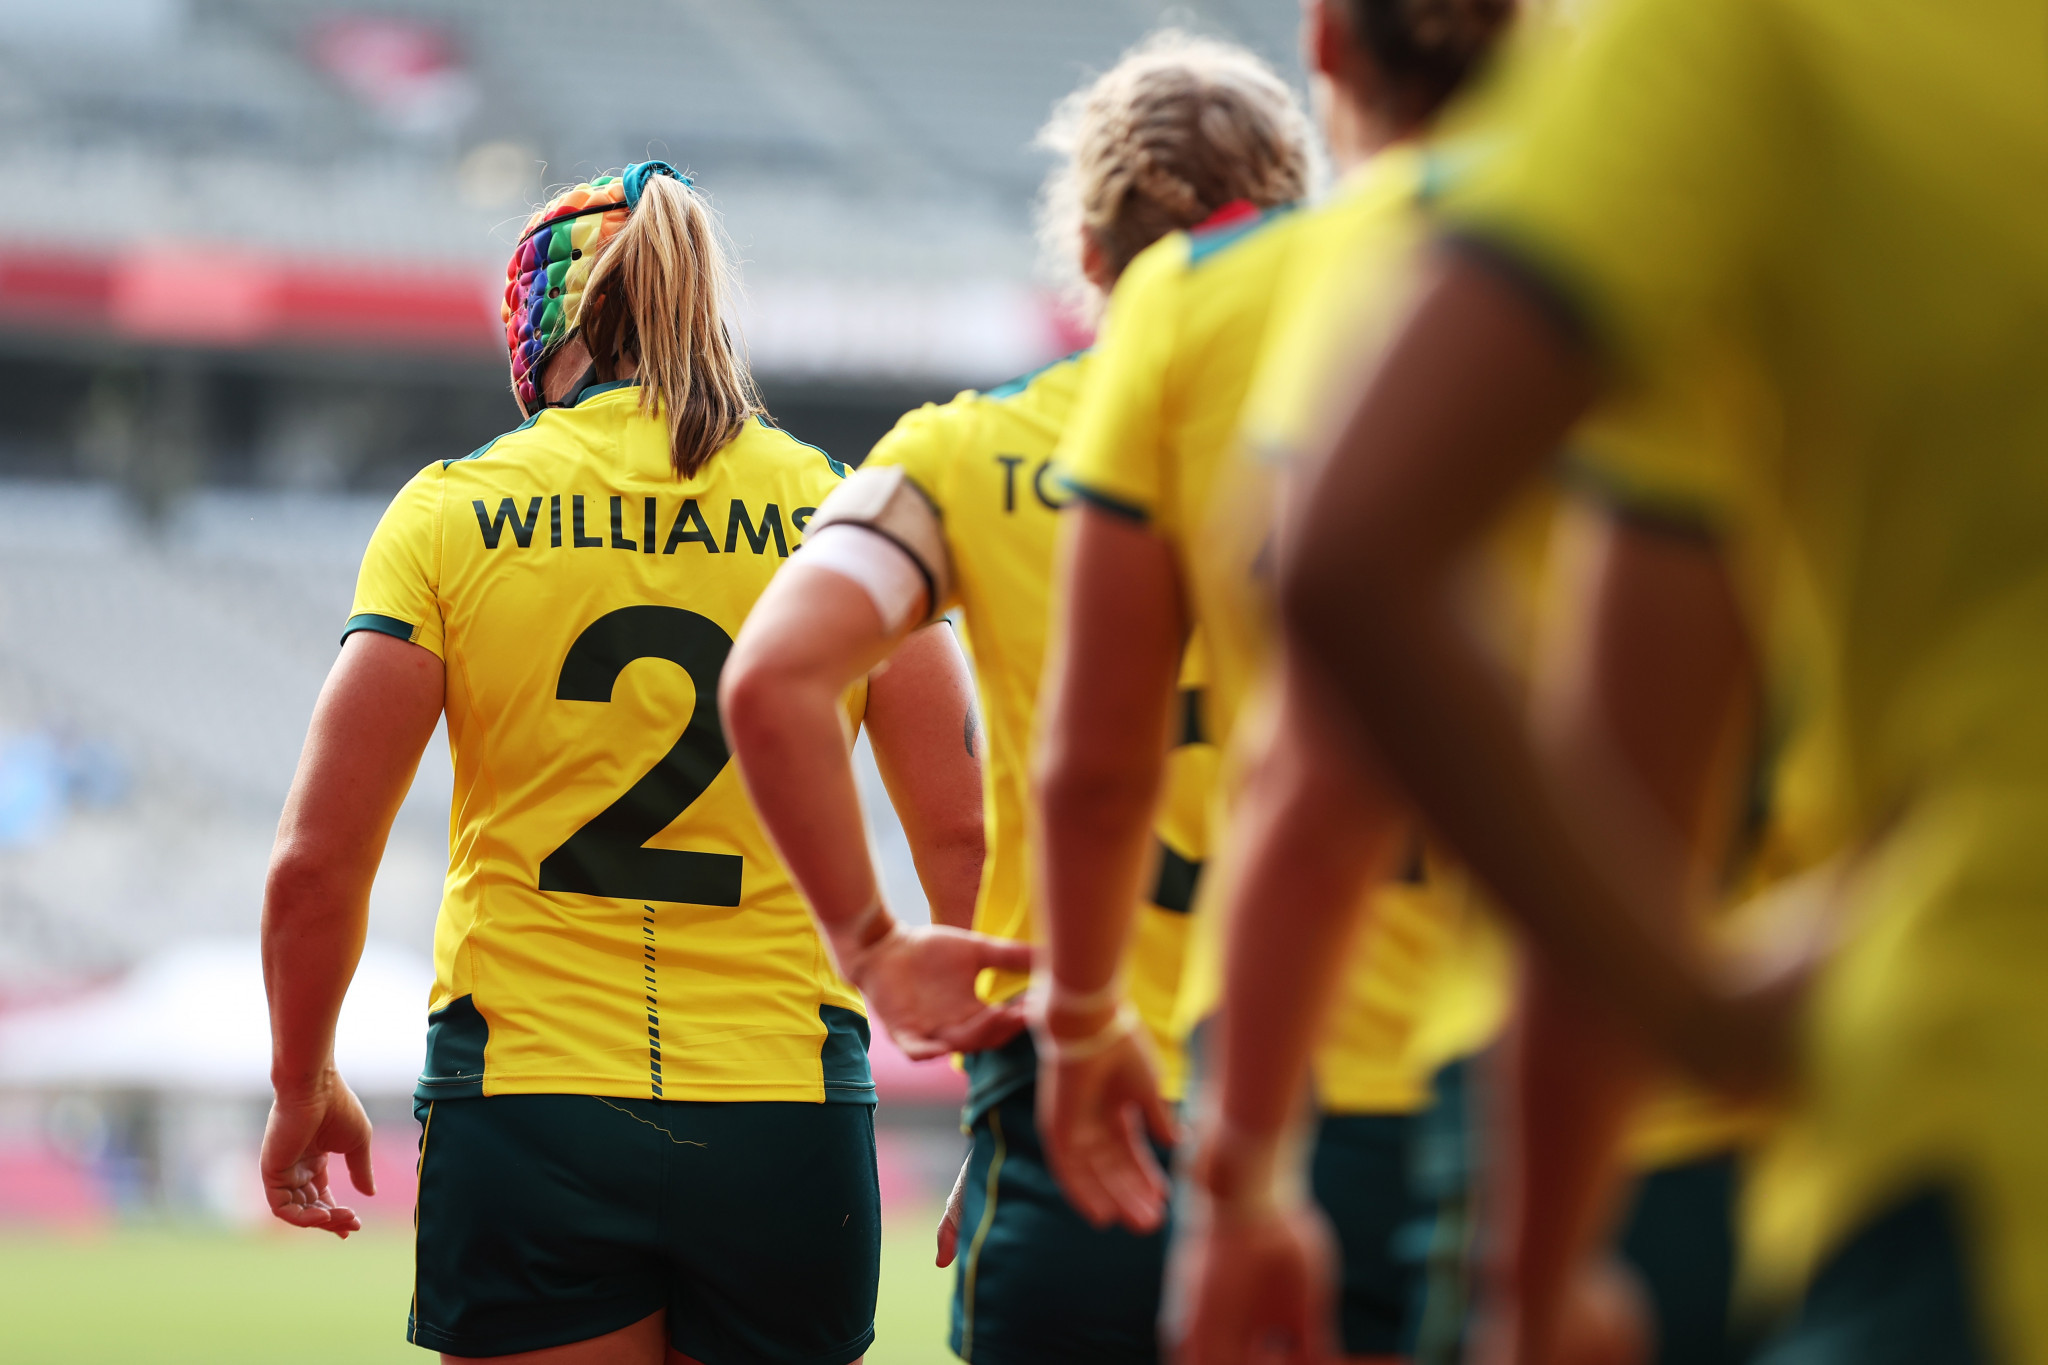 Australia's women's rugby sevens team have been given a 39 per cent funding boost ©Getty Images